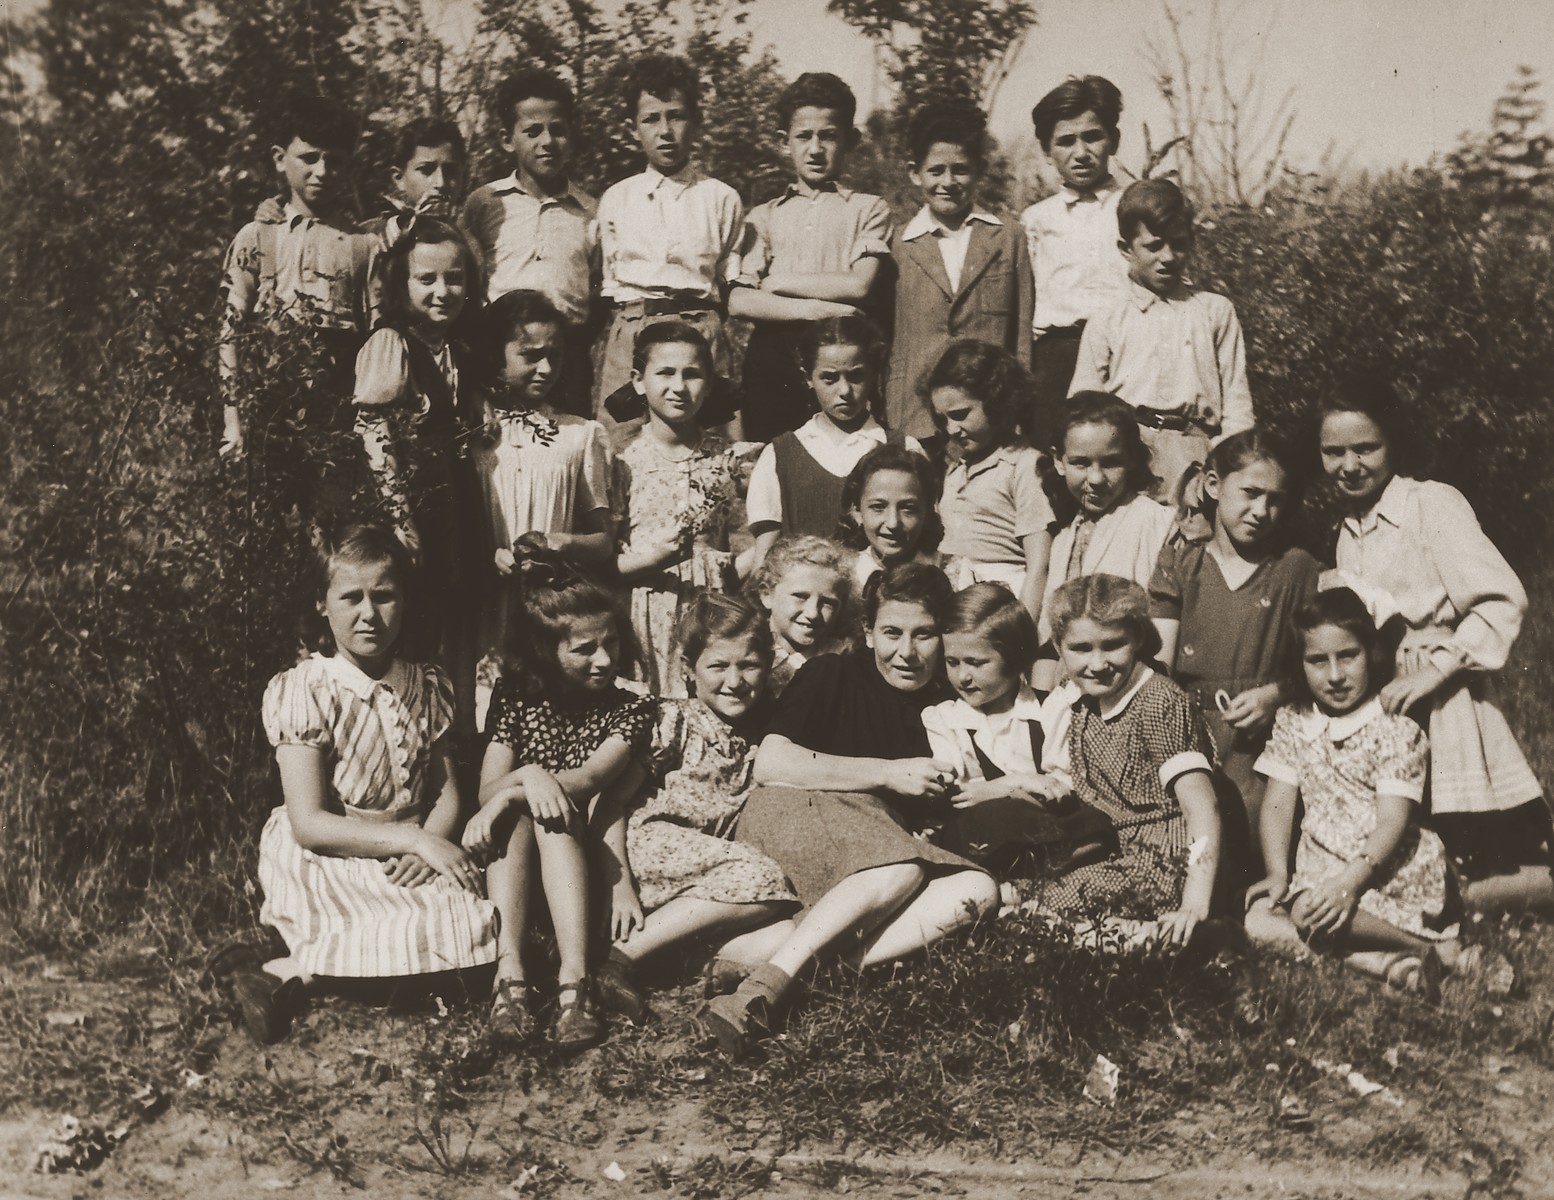 Sima Portnoy, a teacher at the Schlachtensee displaced persons camp, poses with her students outside.